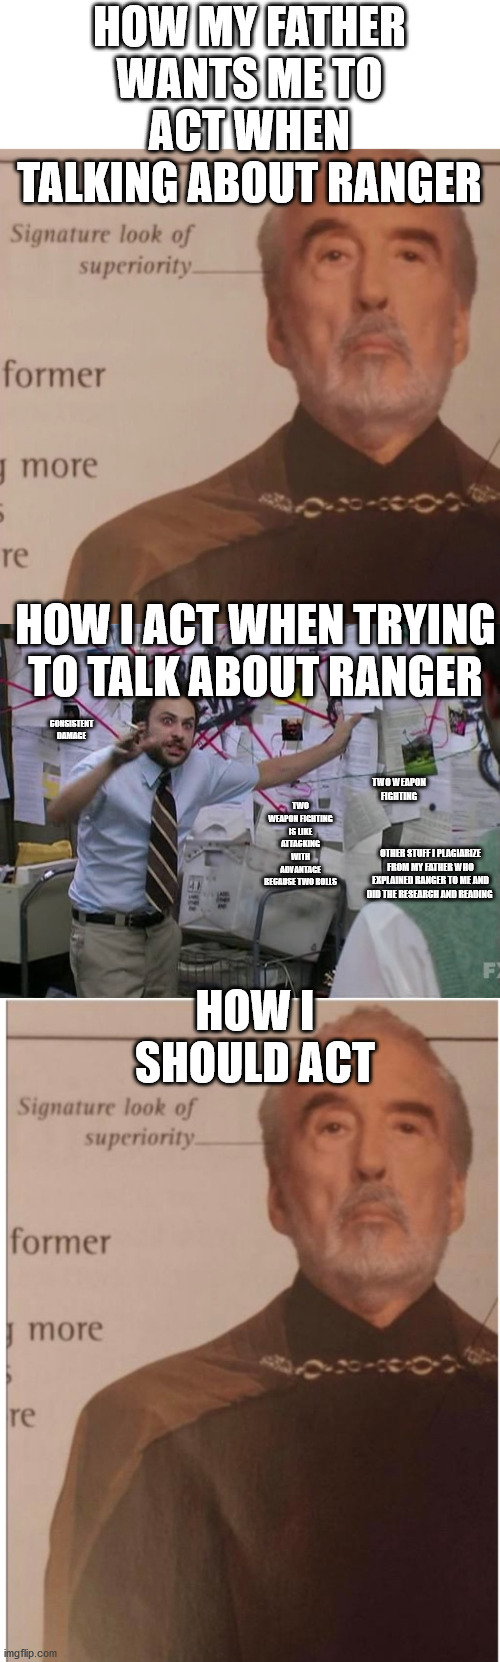 ranger | HOW MY FATHER WANTS ME TO ACT WHEN TALKING ABOUT RANGER; HOW I ACT WHEN TRYING TO TALK ABOUT RANGER; CONSISTENT DAMAGE; TWO WEAPON FIGHTING; TWO WEAPON FIGHTING IS LIKE ATTACKING WITH ADVANTAGE BECAUSE TWO ROLLS; HOW I SHOULD ACT; OTHER STUFF I PLAGIARIZE FROM MY FATHER WHO EXPLAINED RANGER TO ME AND DID THE RESEARCH AND READING | image tagged in useless stuff | made w/ Imgflip meme maker